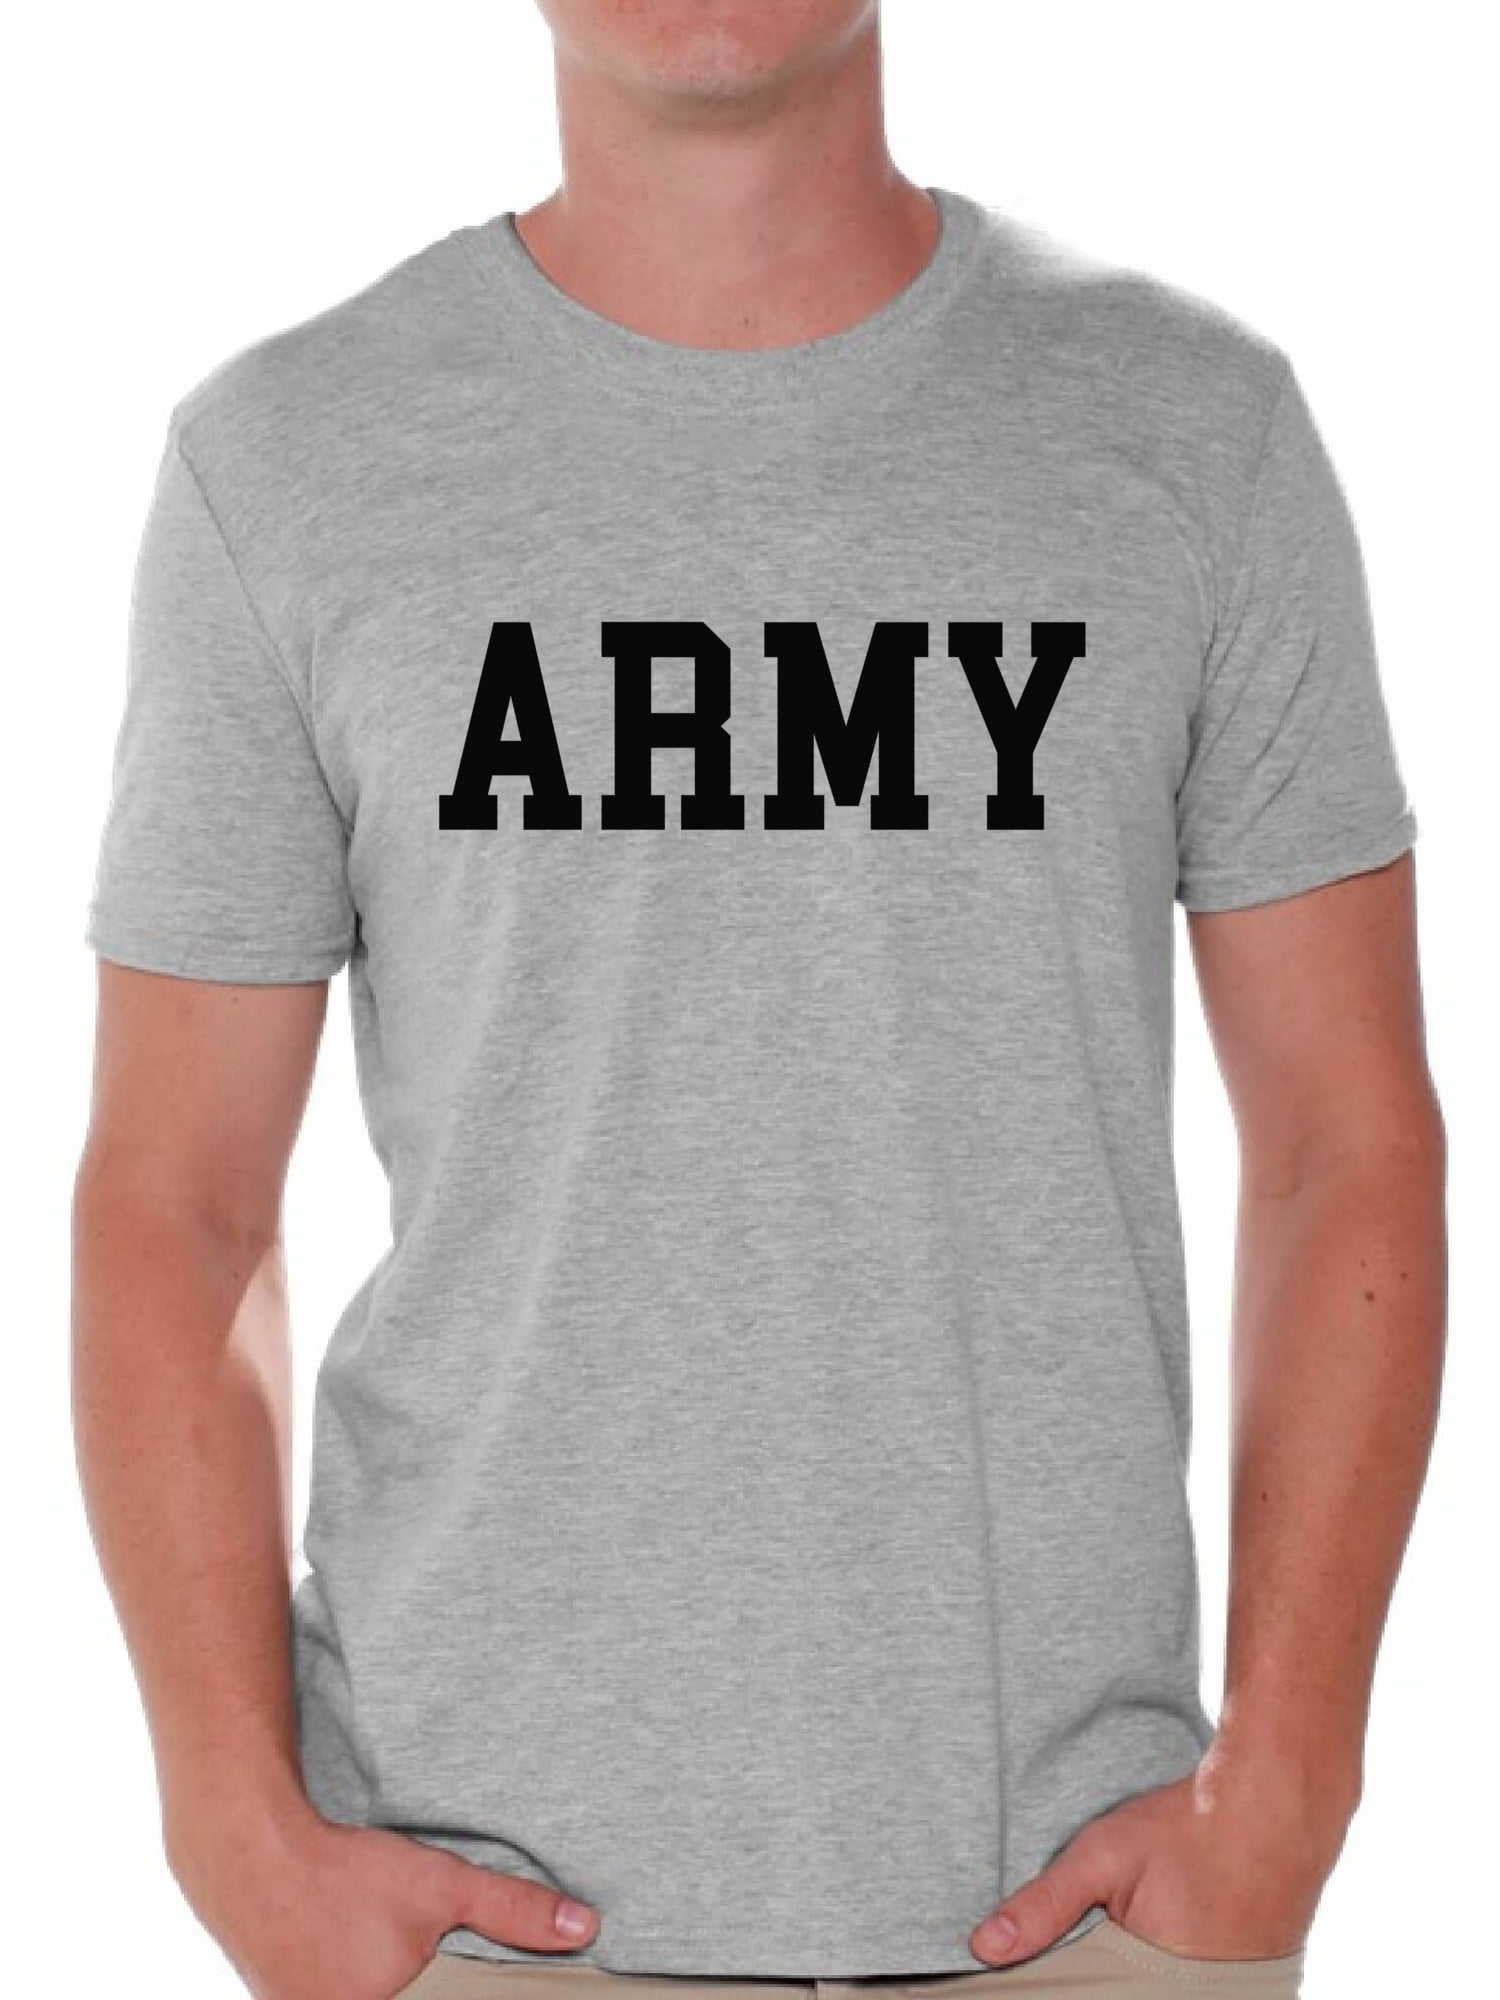 Awkward Styles Army Tshirt Army Shirts for Men Army Gifts for Him Men's ...